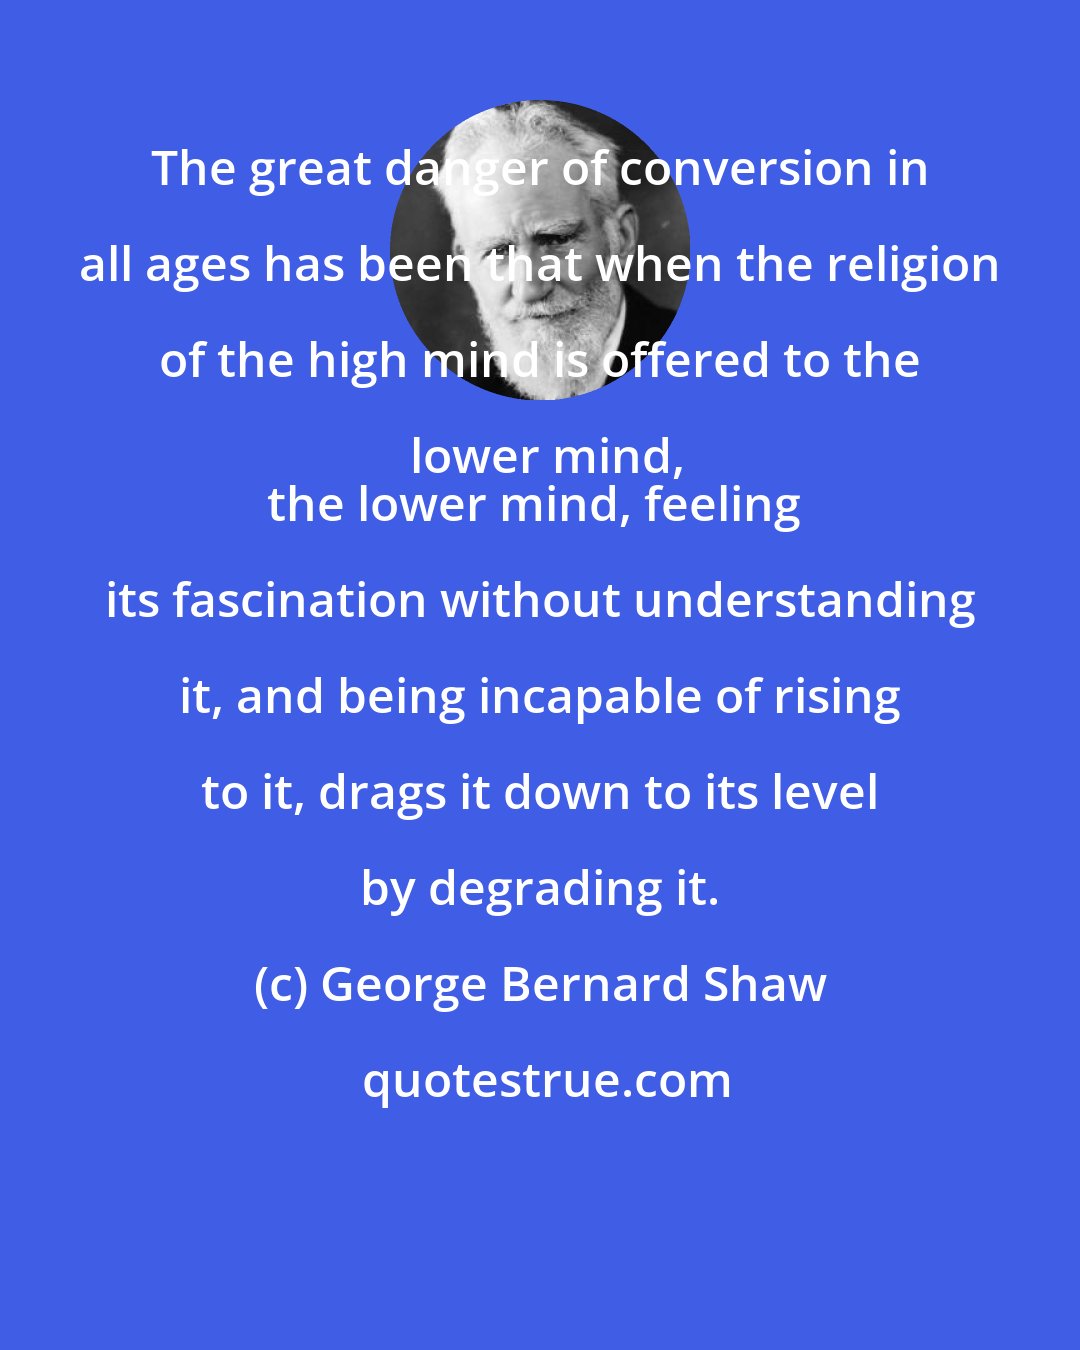 George Bernard Shaw: The great danger of conversion in all ages has been that when the religion of the high mind is offered to the lower mind,
the lower mind, feeling its fascination without understanding it, and being incapable of rising to it, drags it down to its level by degrading it.